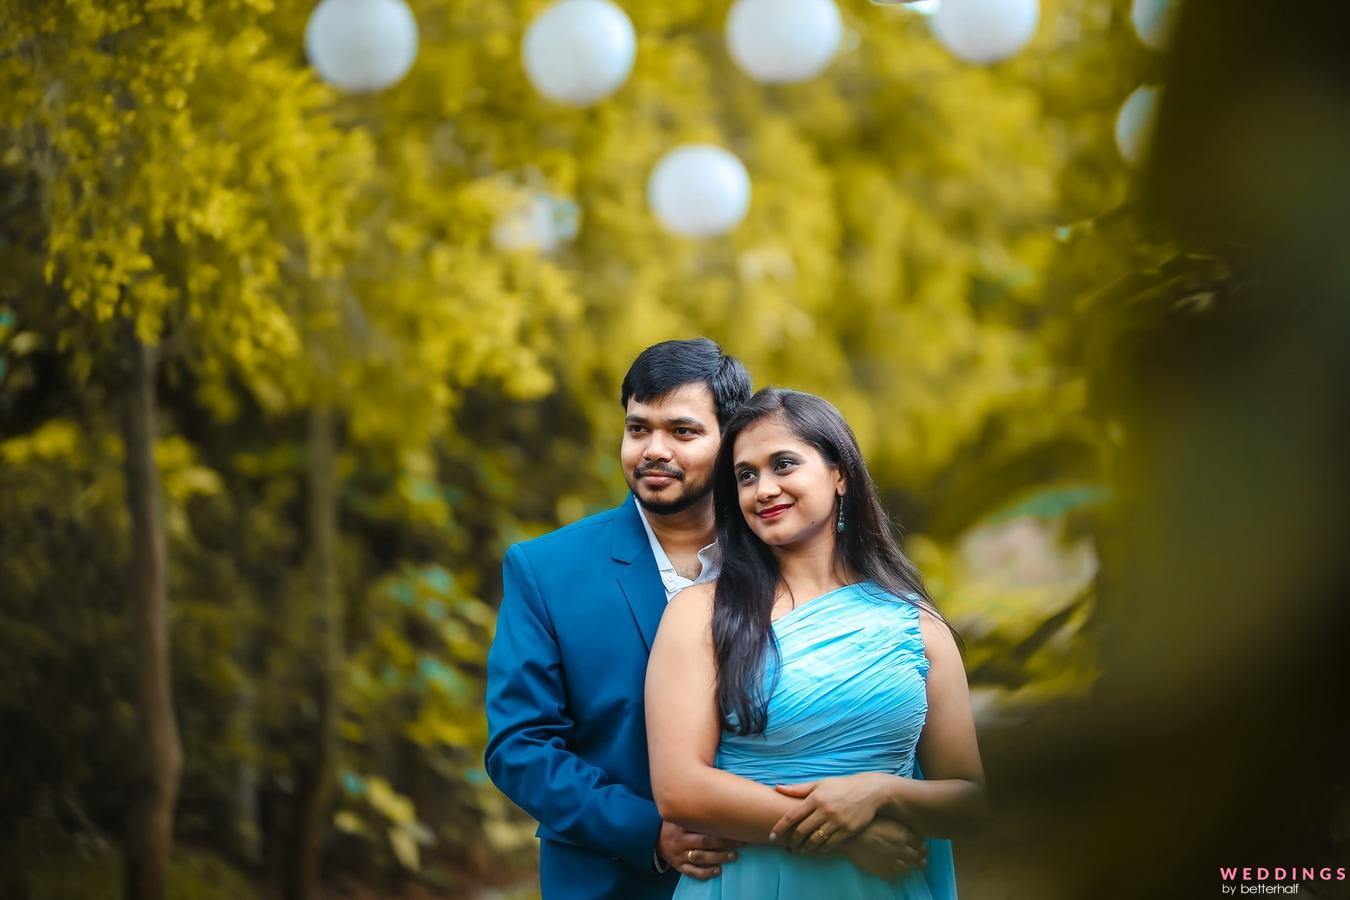 Checklist to help you make the most of your pre-wedding photoshoot